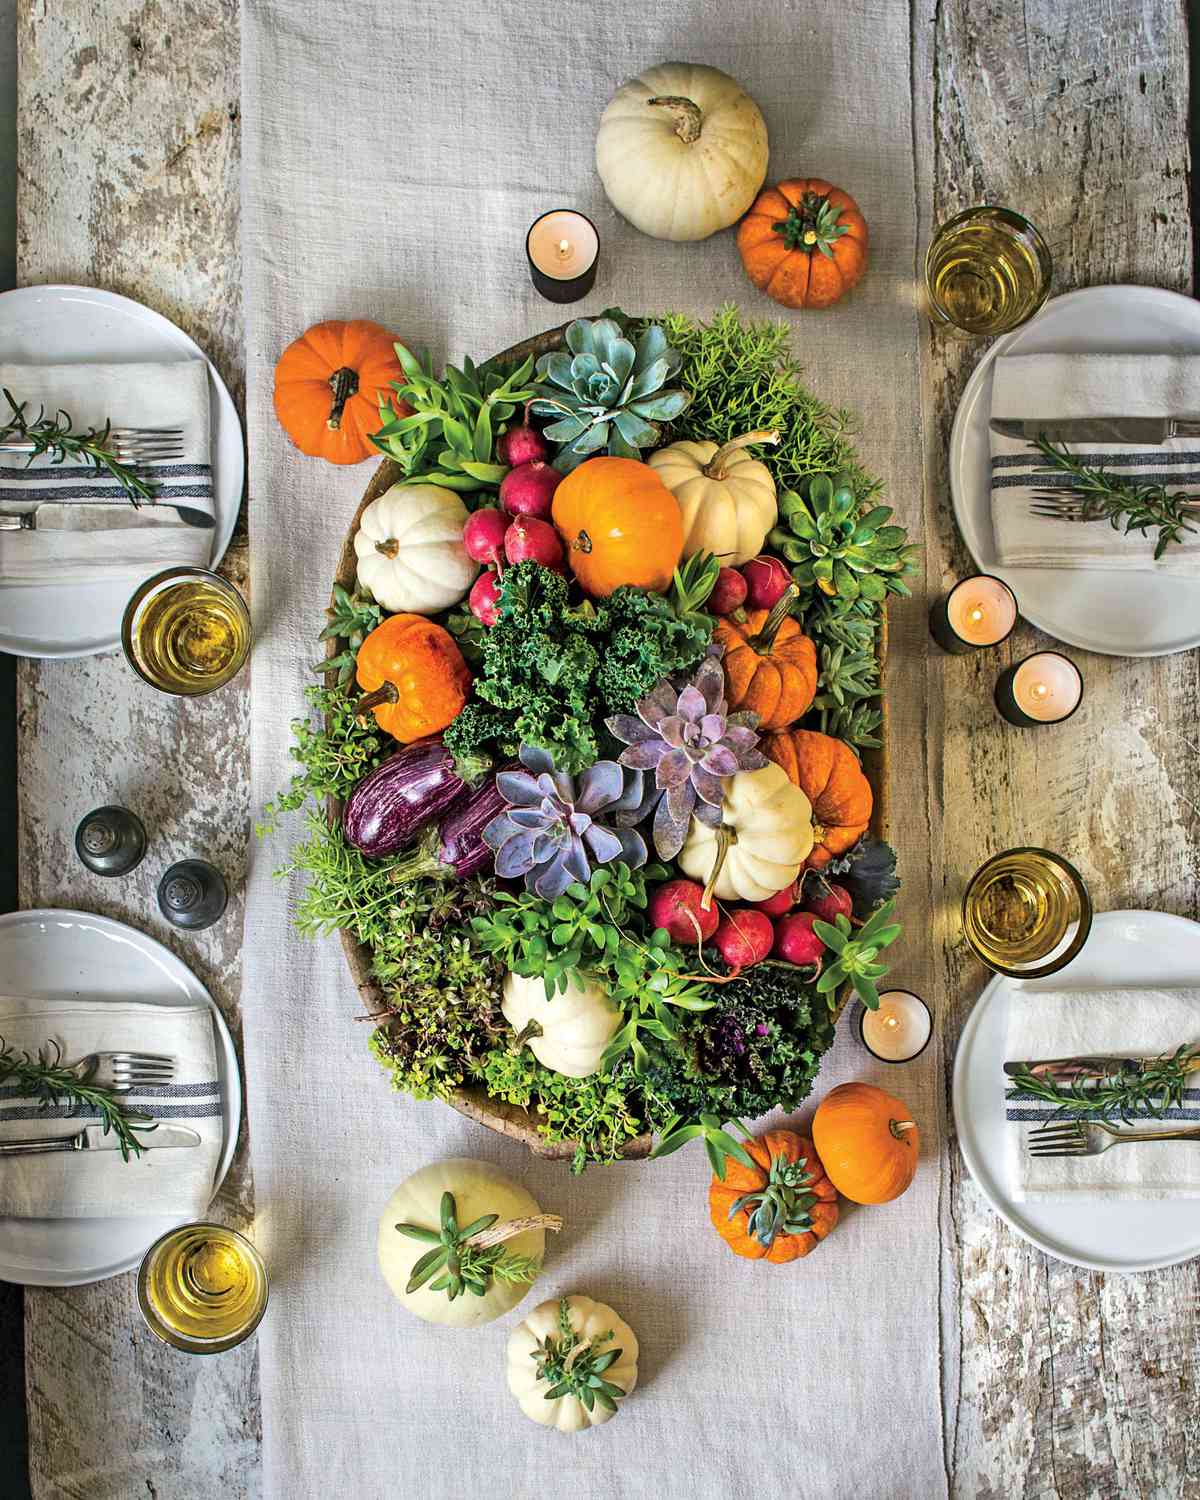 Fall Centerpieces to Complete Your Autumn Feast | Southern Living